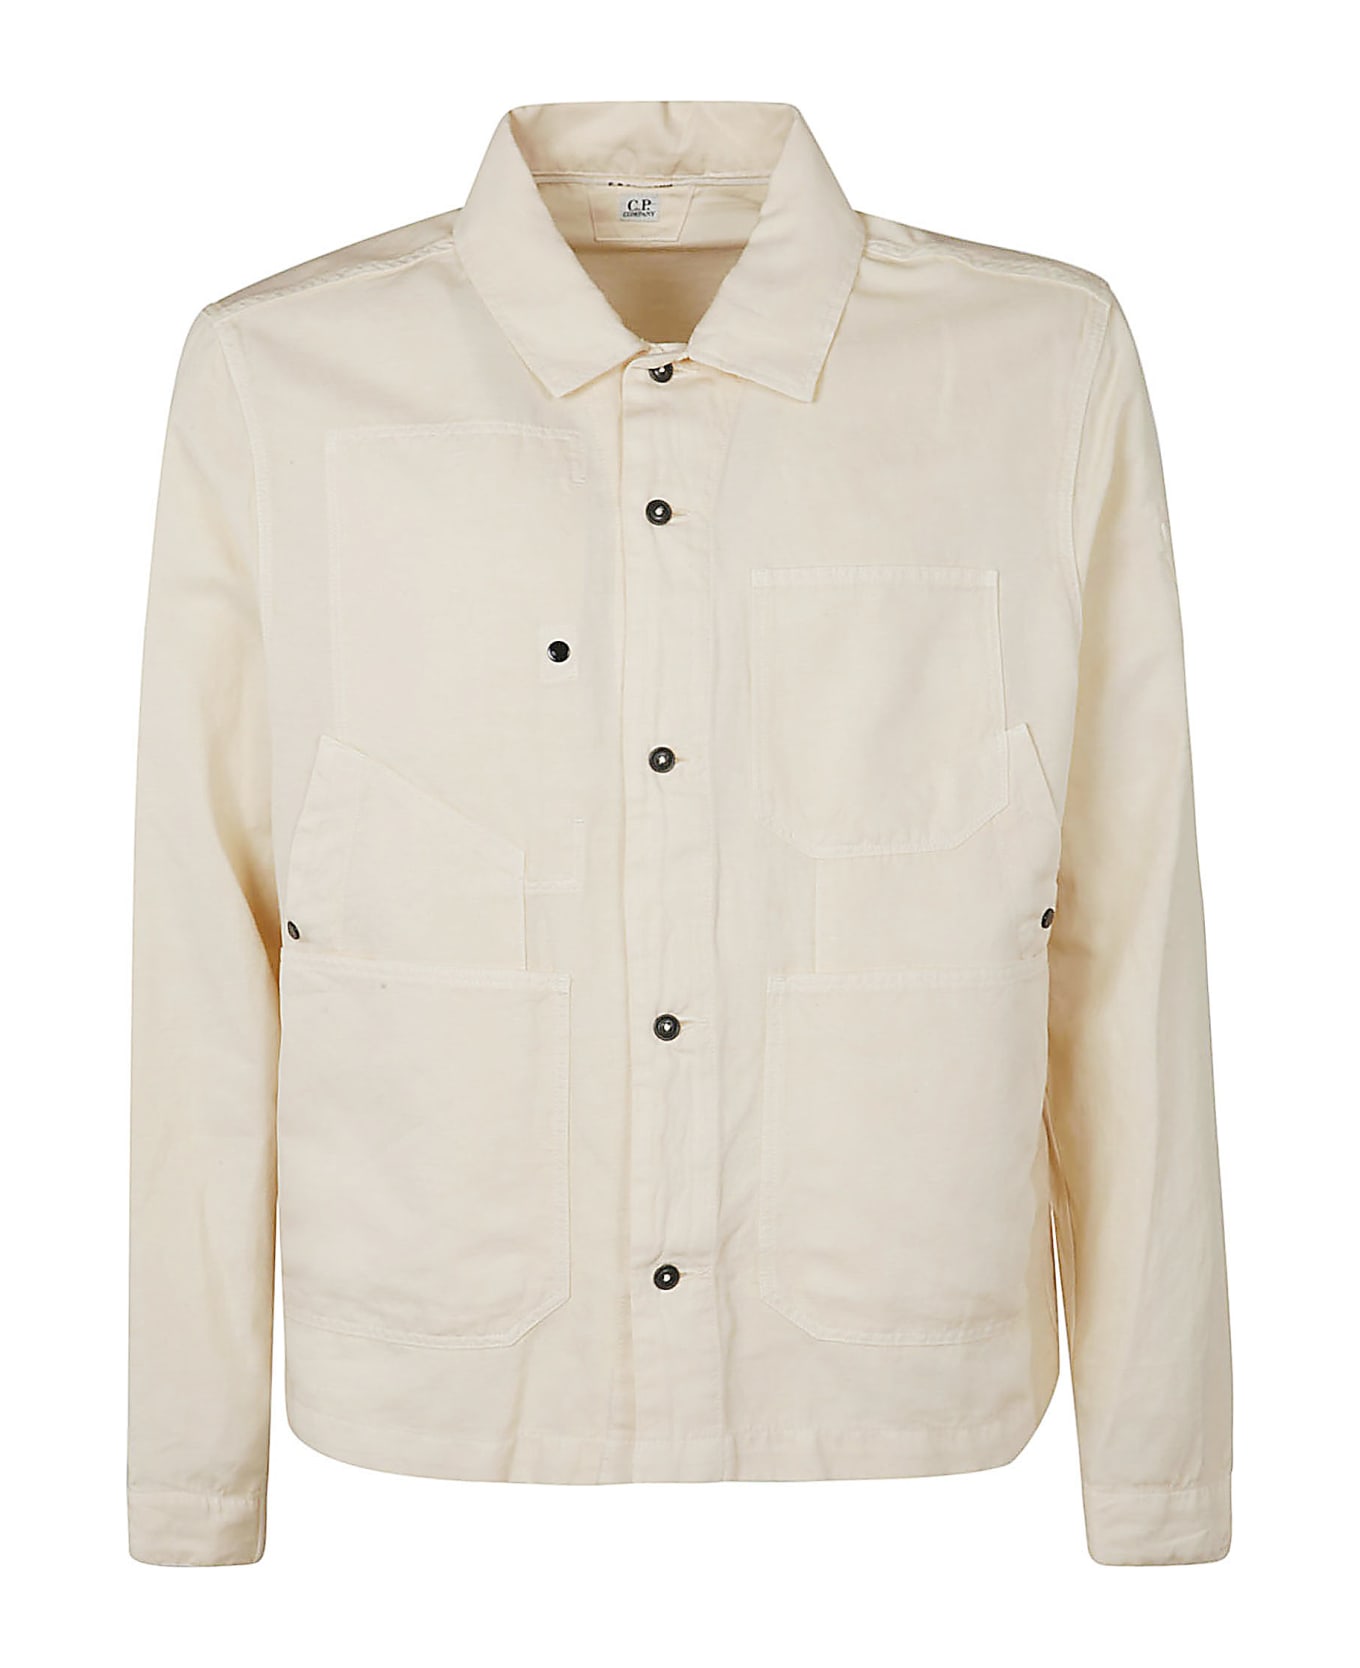 C.P. Company Multi Patched Pocket Buttoned Overshirt - Pistachio